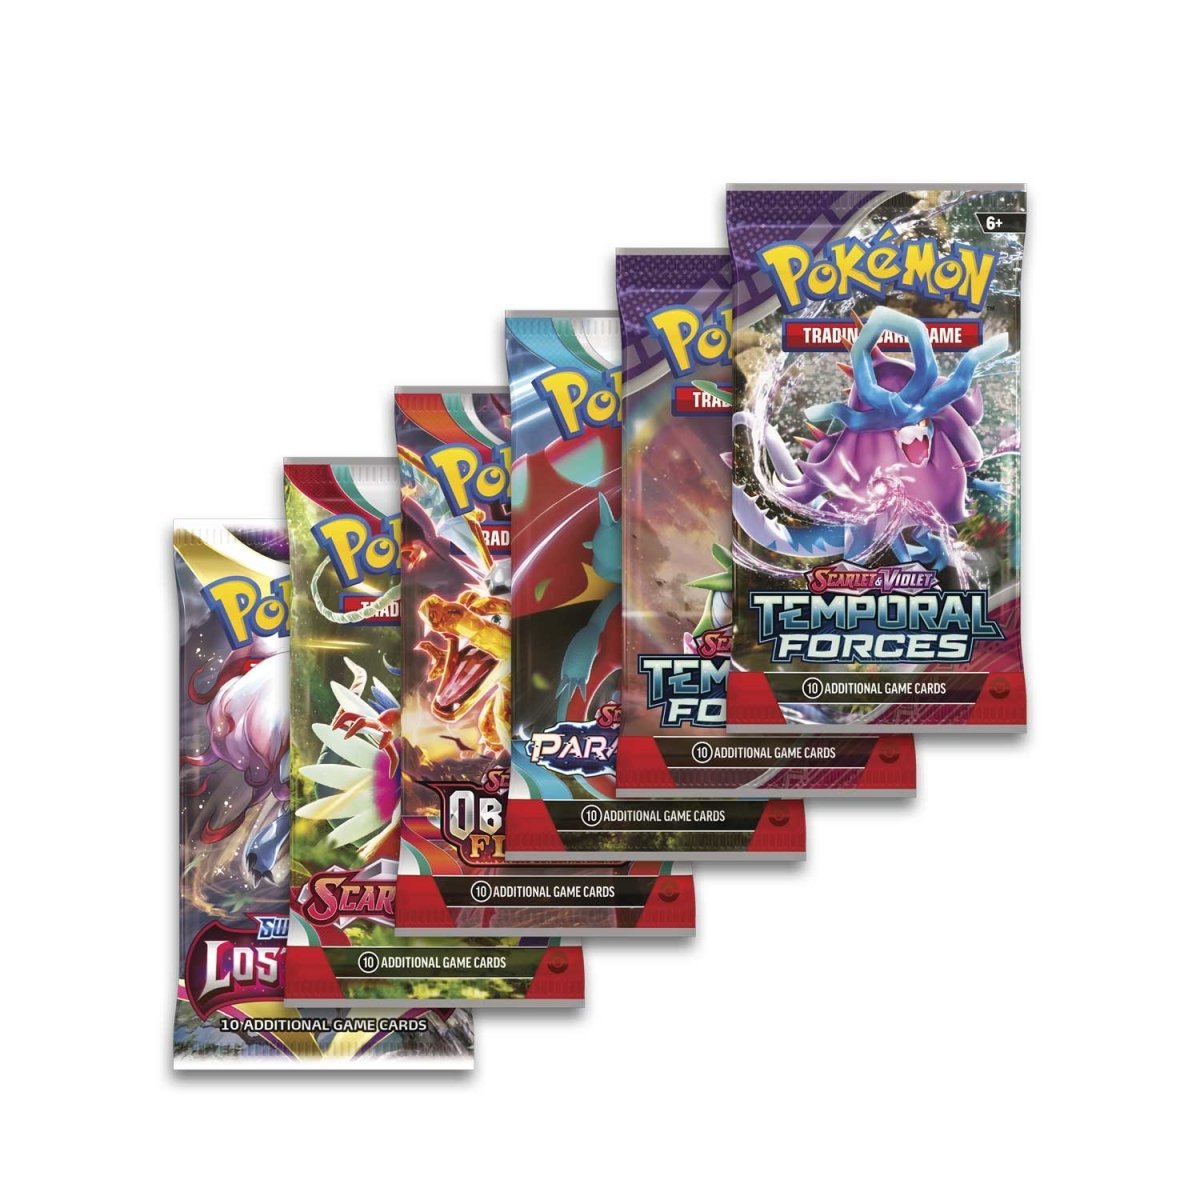 Iono Premium Tournament Collection pack selection